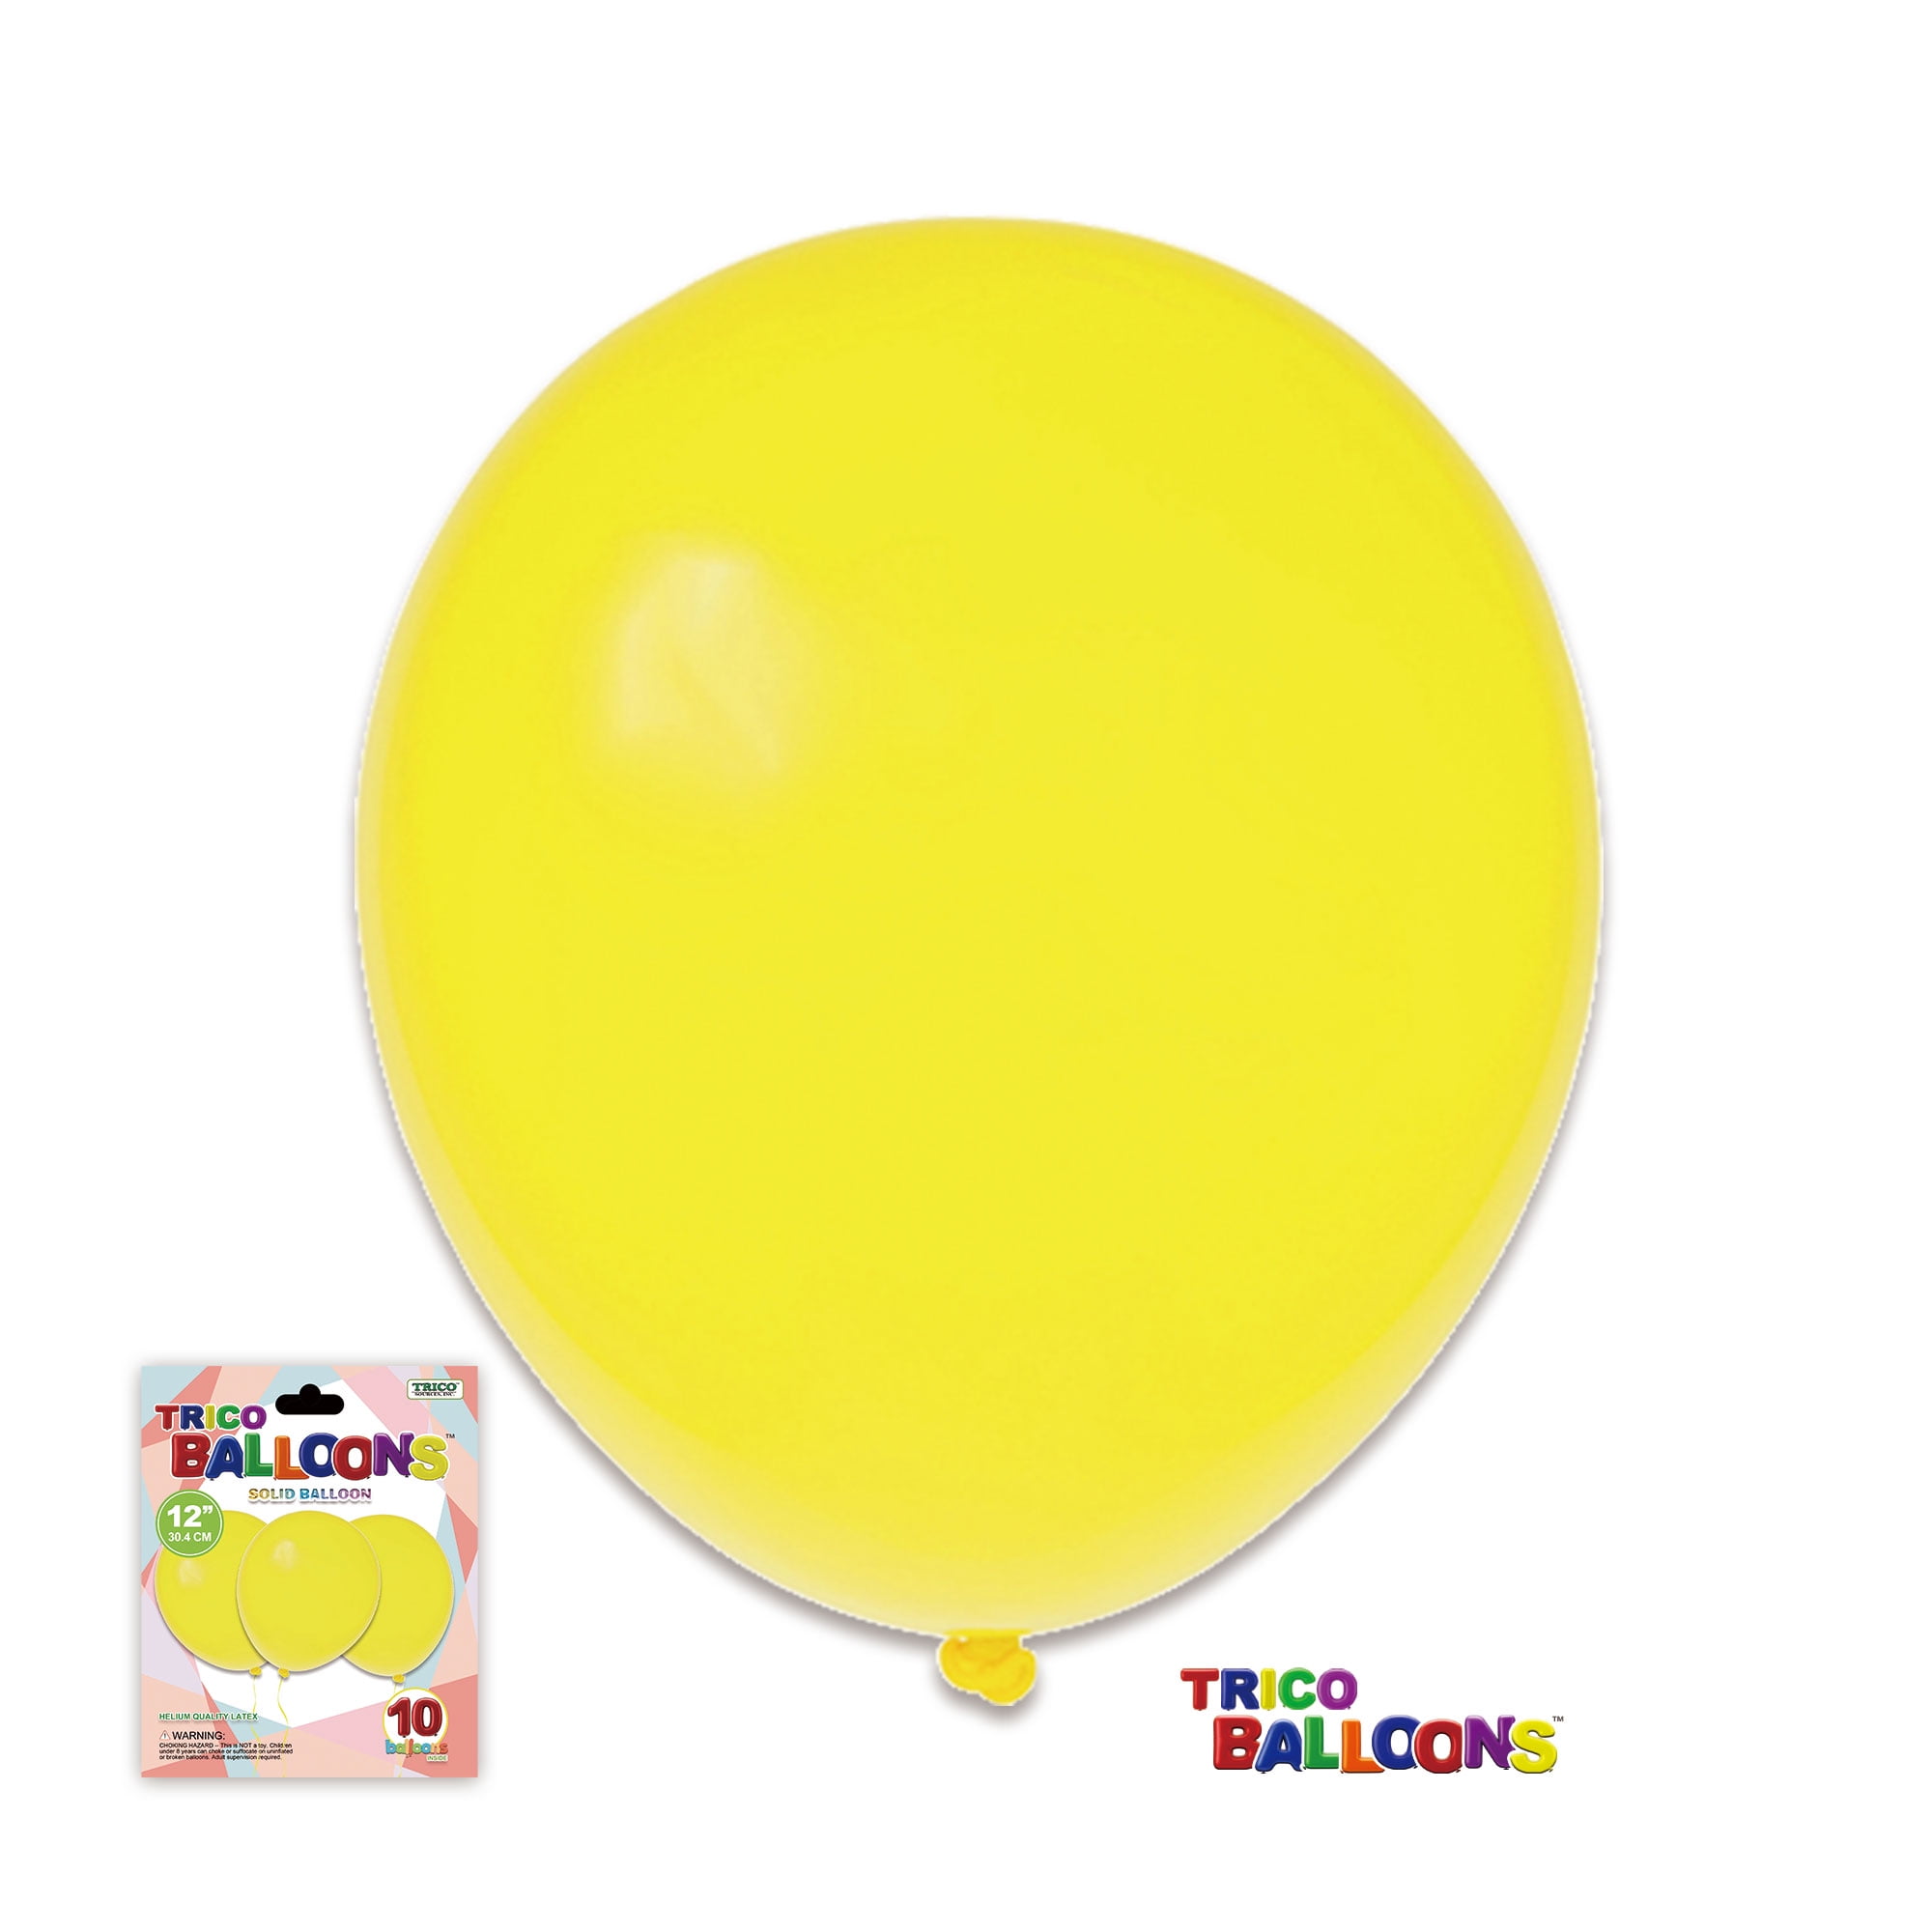 BALLOON GLOW | Balloon Glow PRO | 10 oz High Shine Spray for Latex Balloons  | Instant Gloss & Vibrant Finish | Glass-Like Finish in Minutes | Easy to